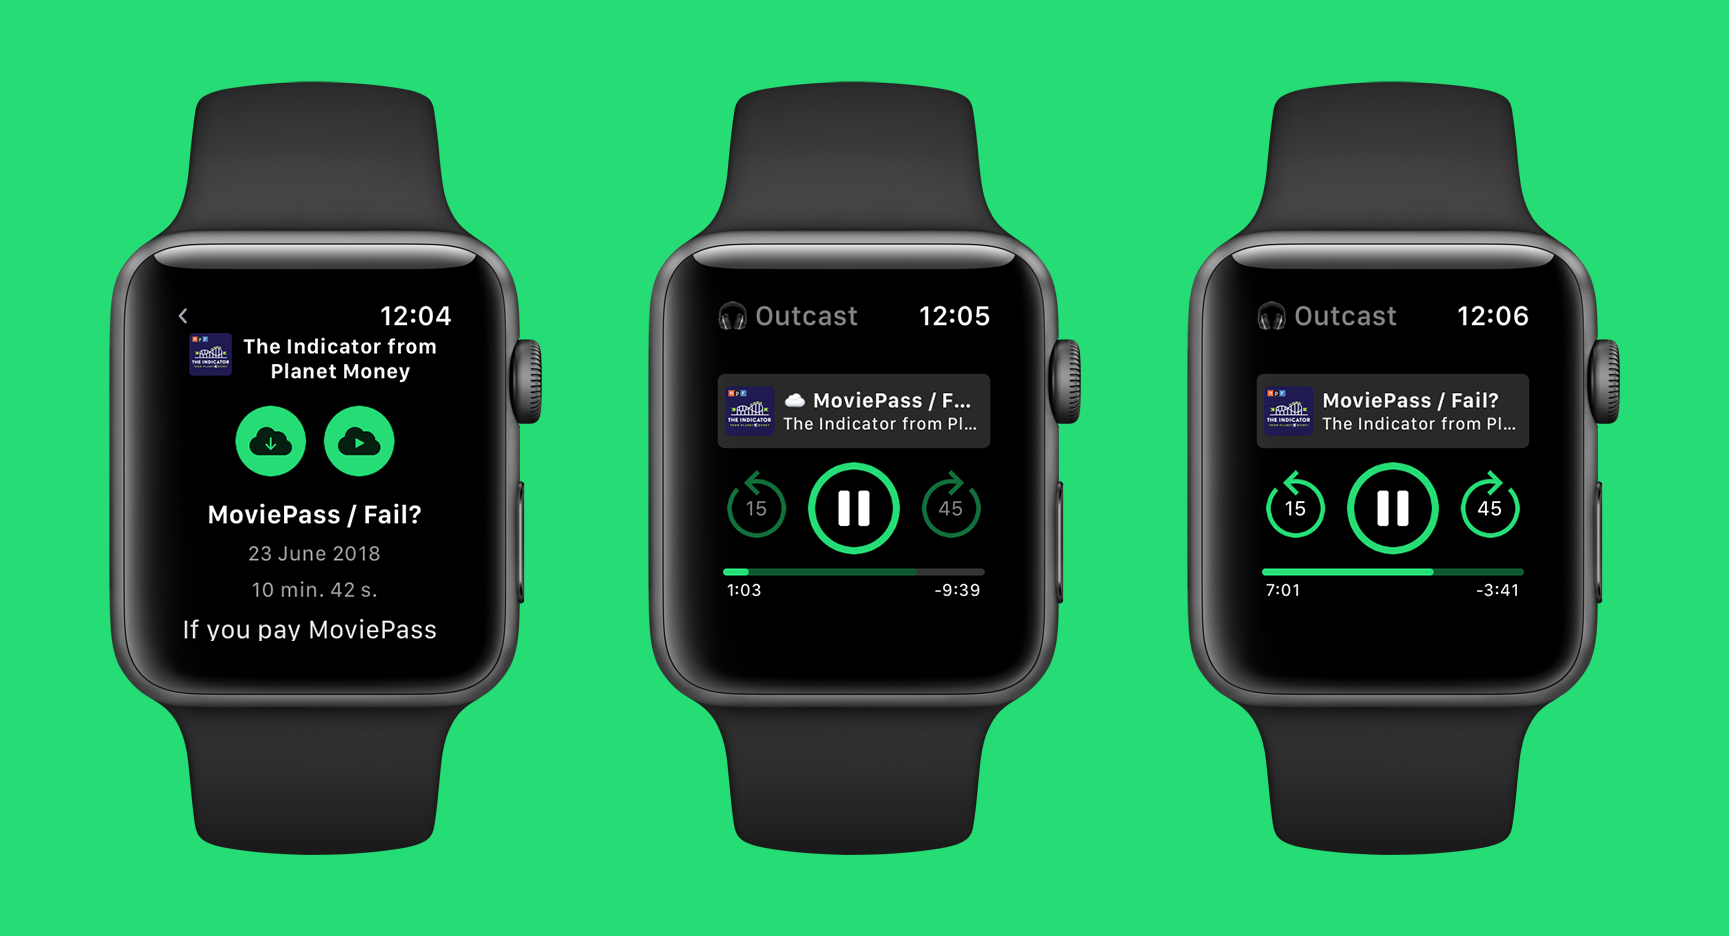 New version of Outcast brings podcast playlists on Apple Watch